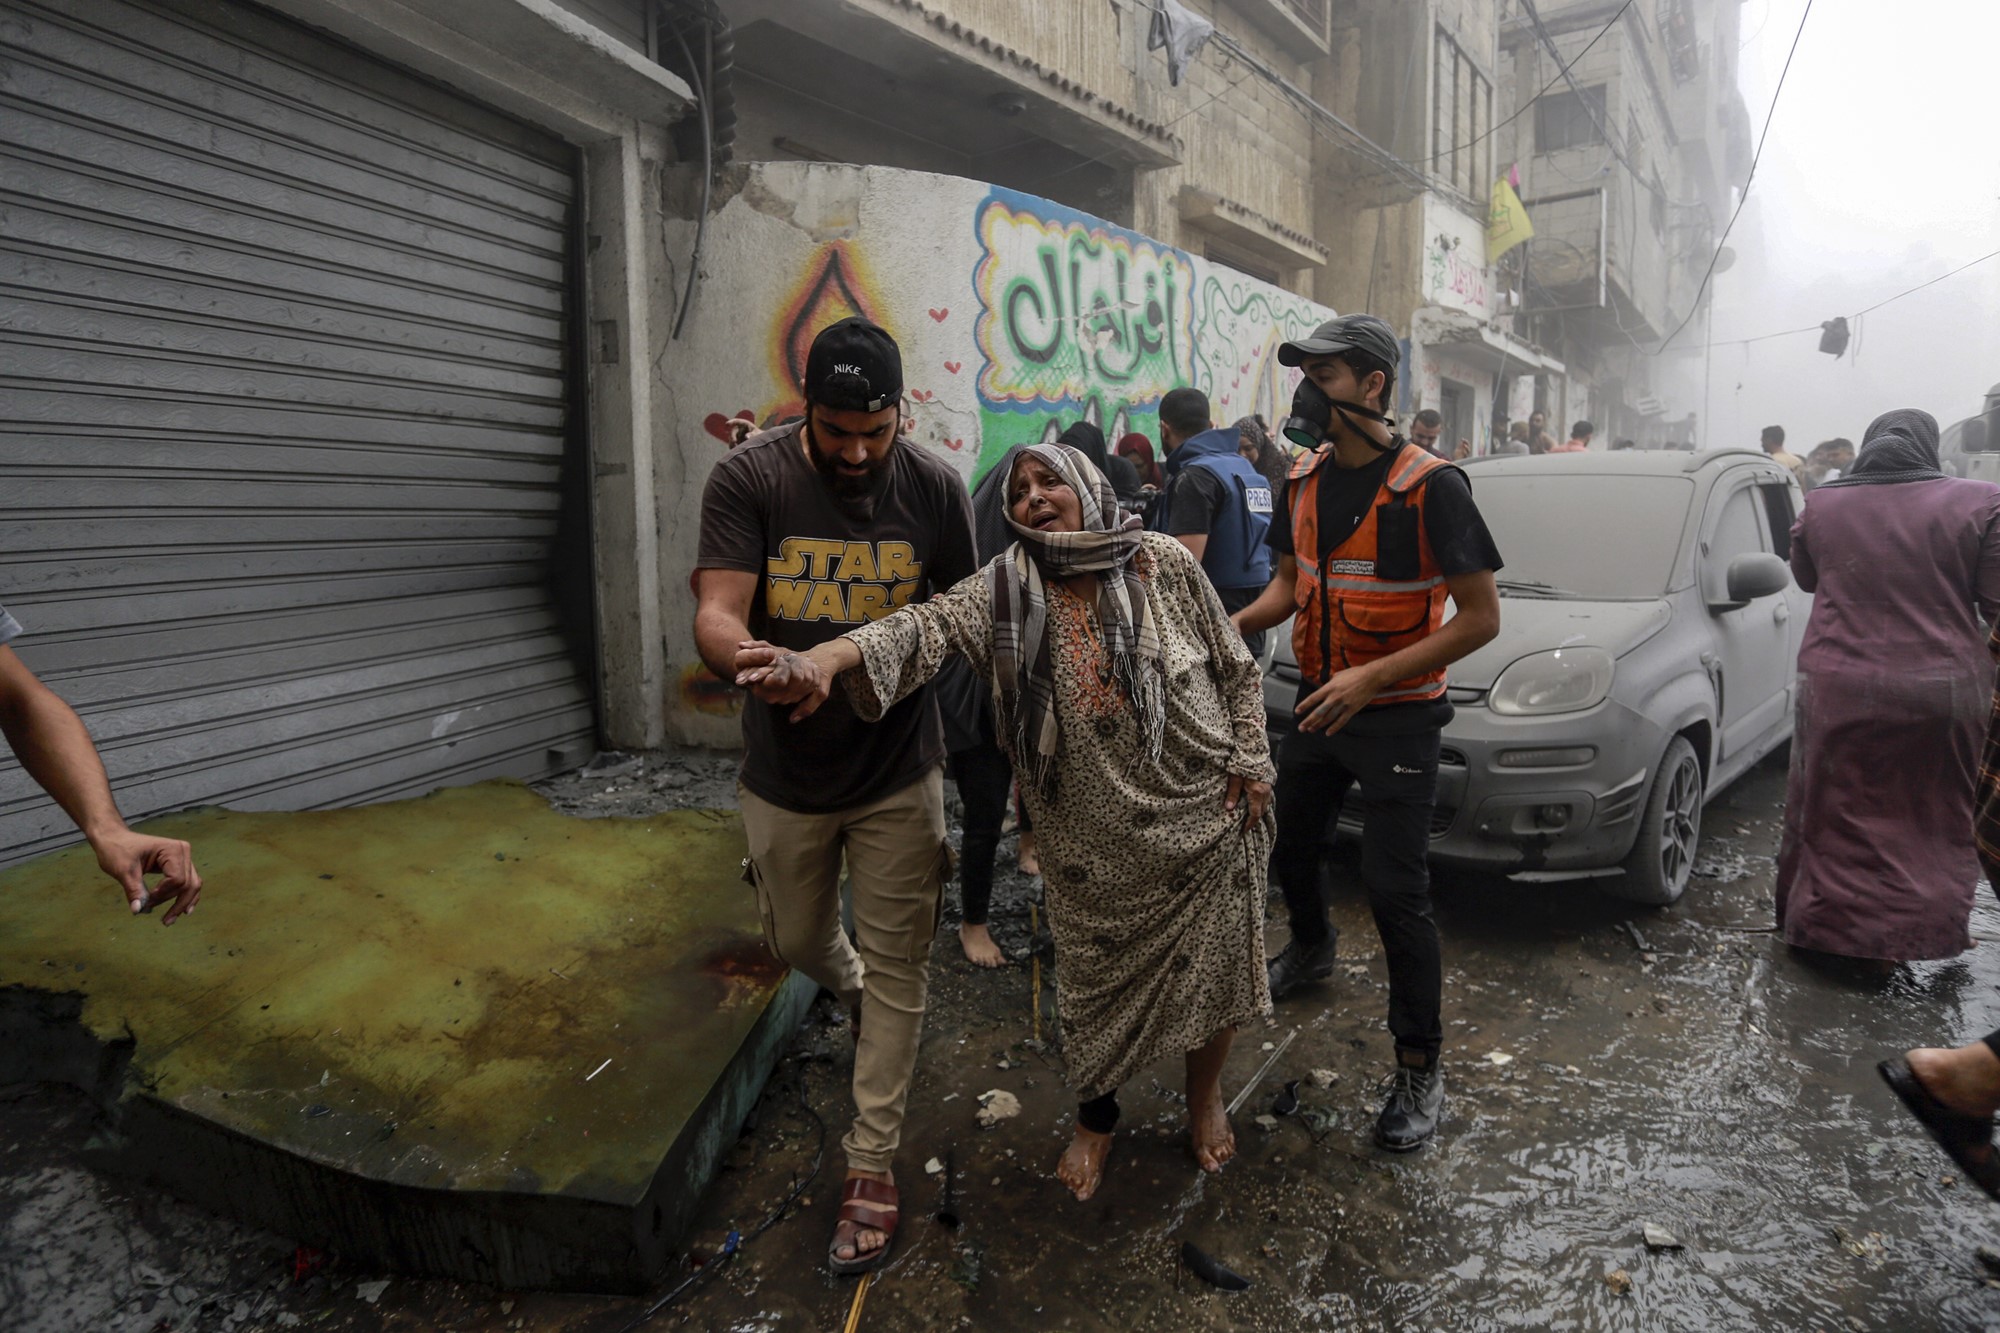 A woman is being led away by two men walking down a street filled wih water and debris